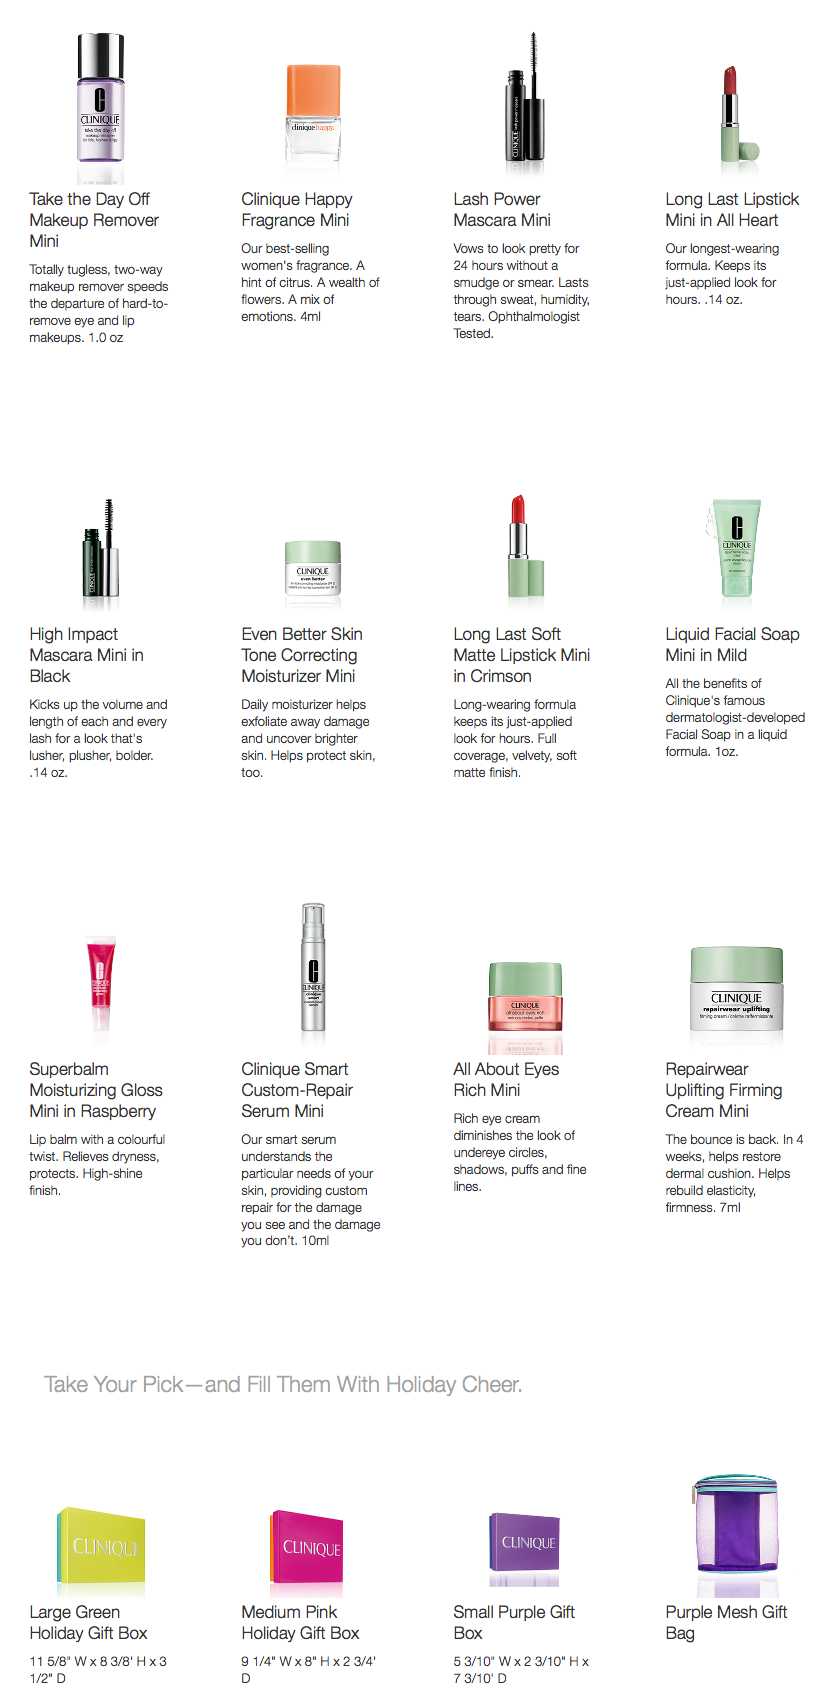 Clinique gift with purchase - 5 minis w/$35 purchase + $30 off $80 & 7 ...